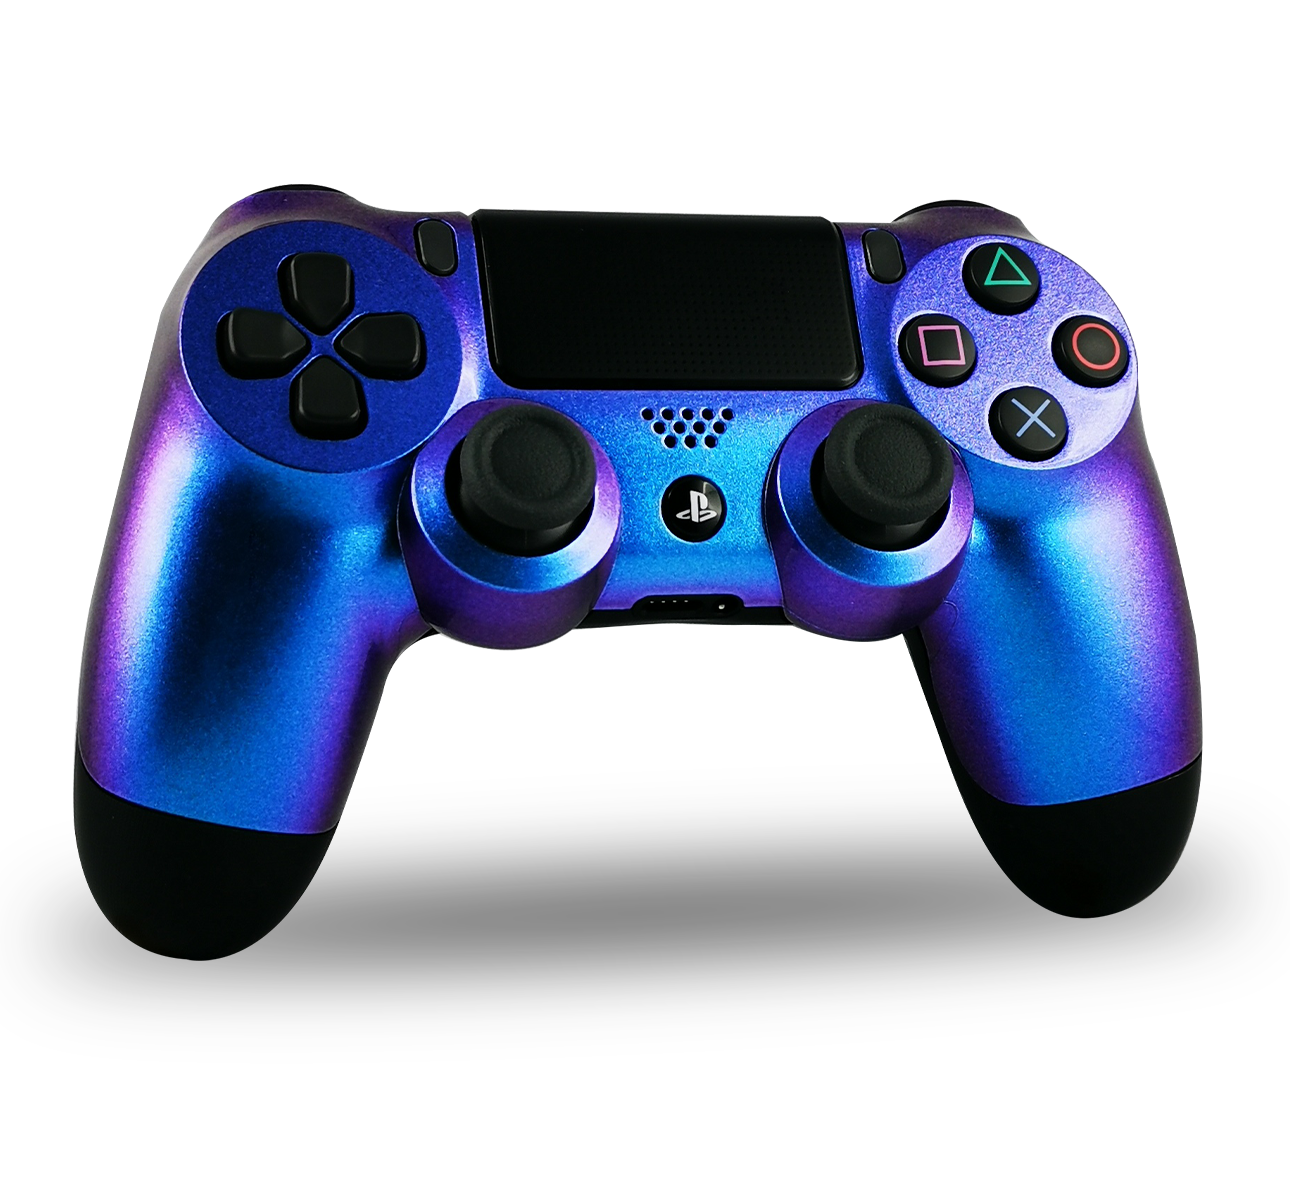 manette-PS4-custom-playstation-4-sony-personnalisee-drawmypad-cameleon